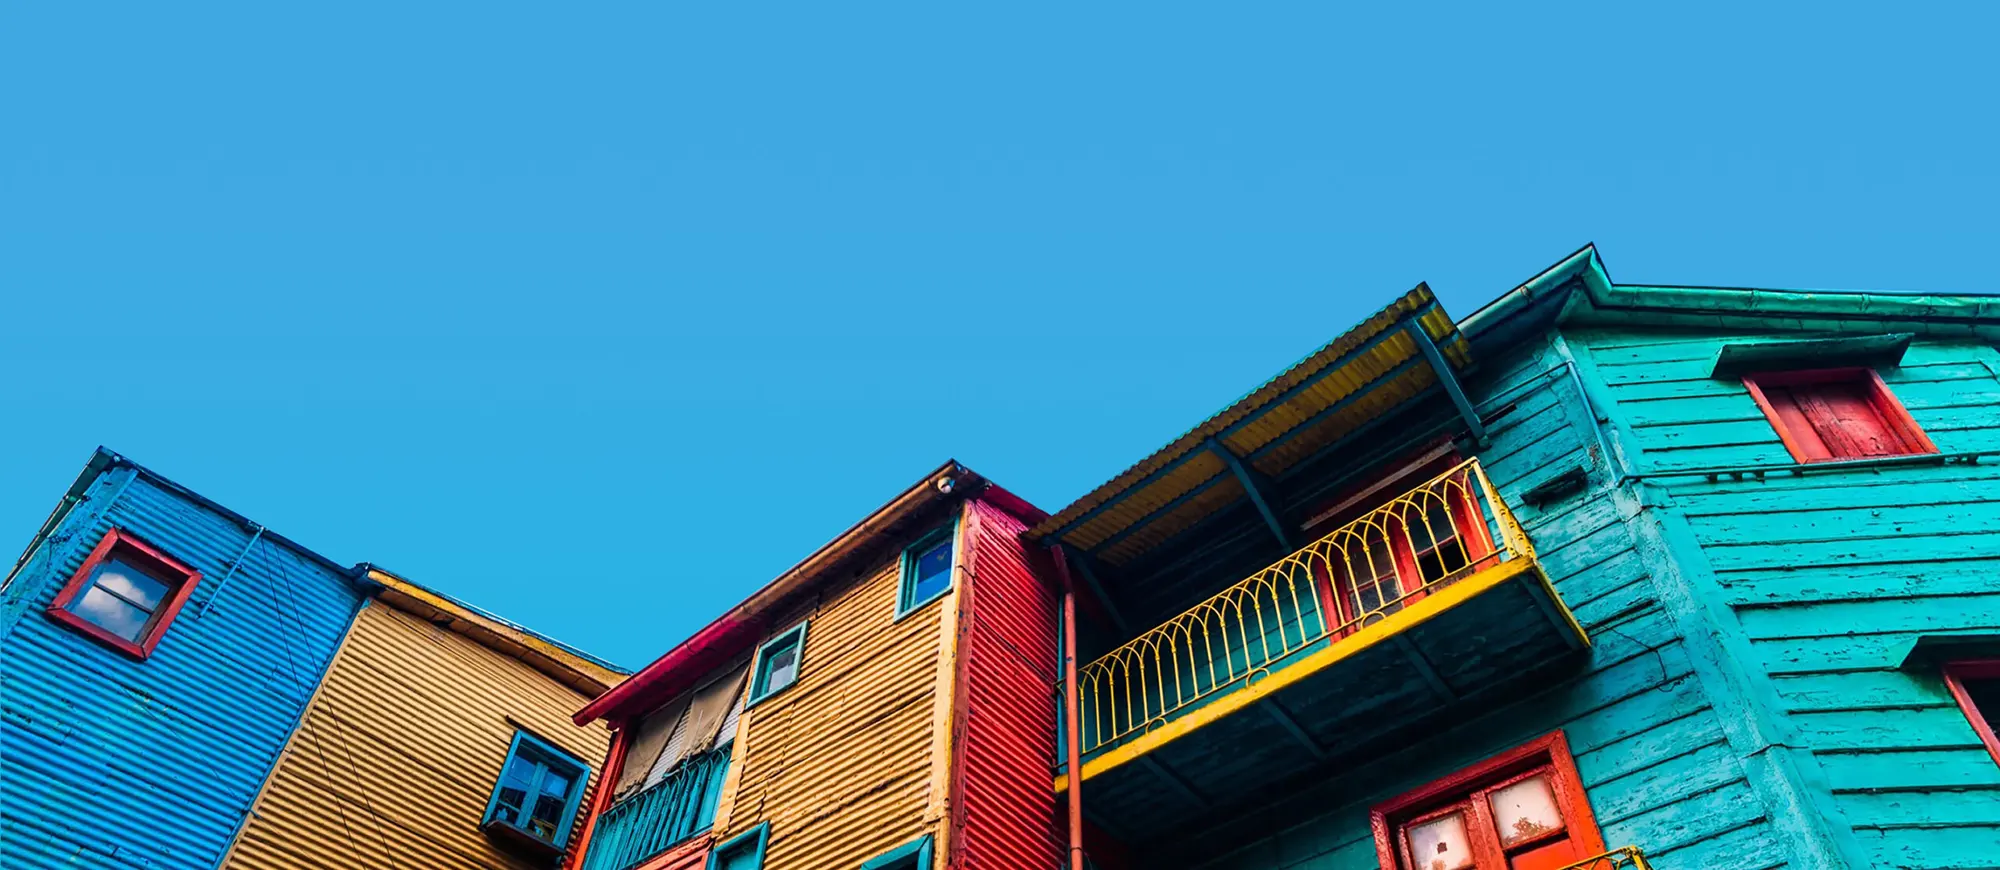 La Boca is a popular destination for tourists visiting Argentina, with its colourful houses and pedestrian streets